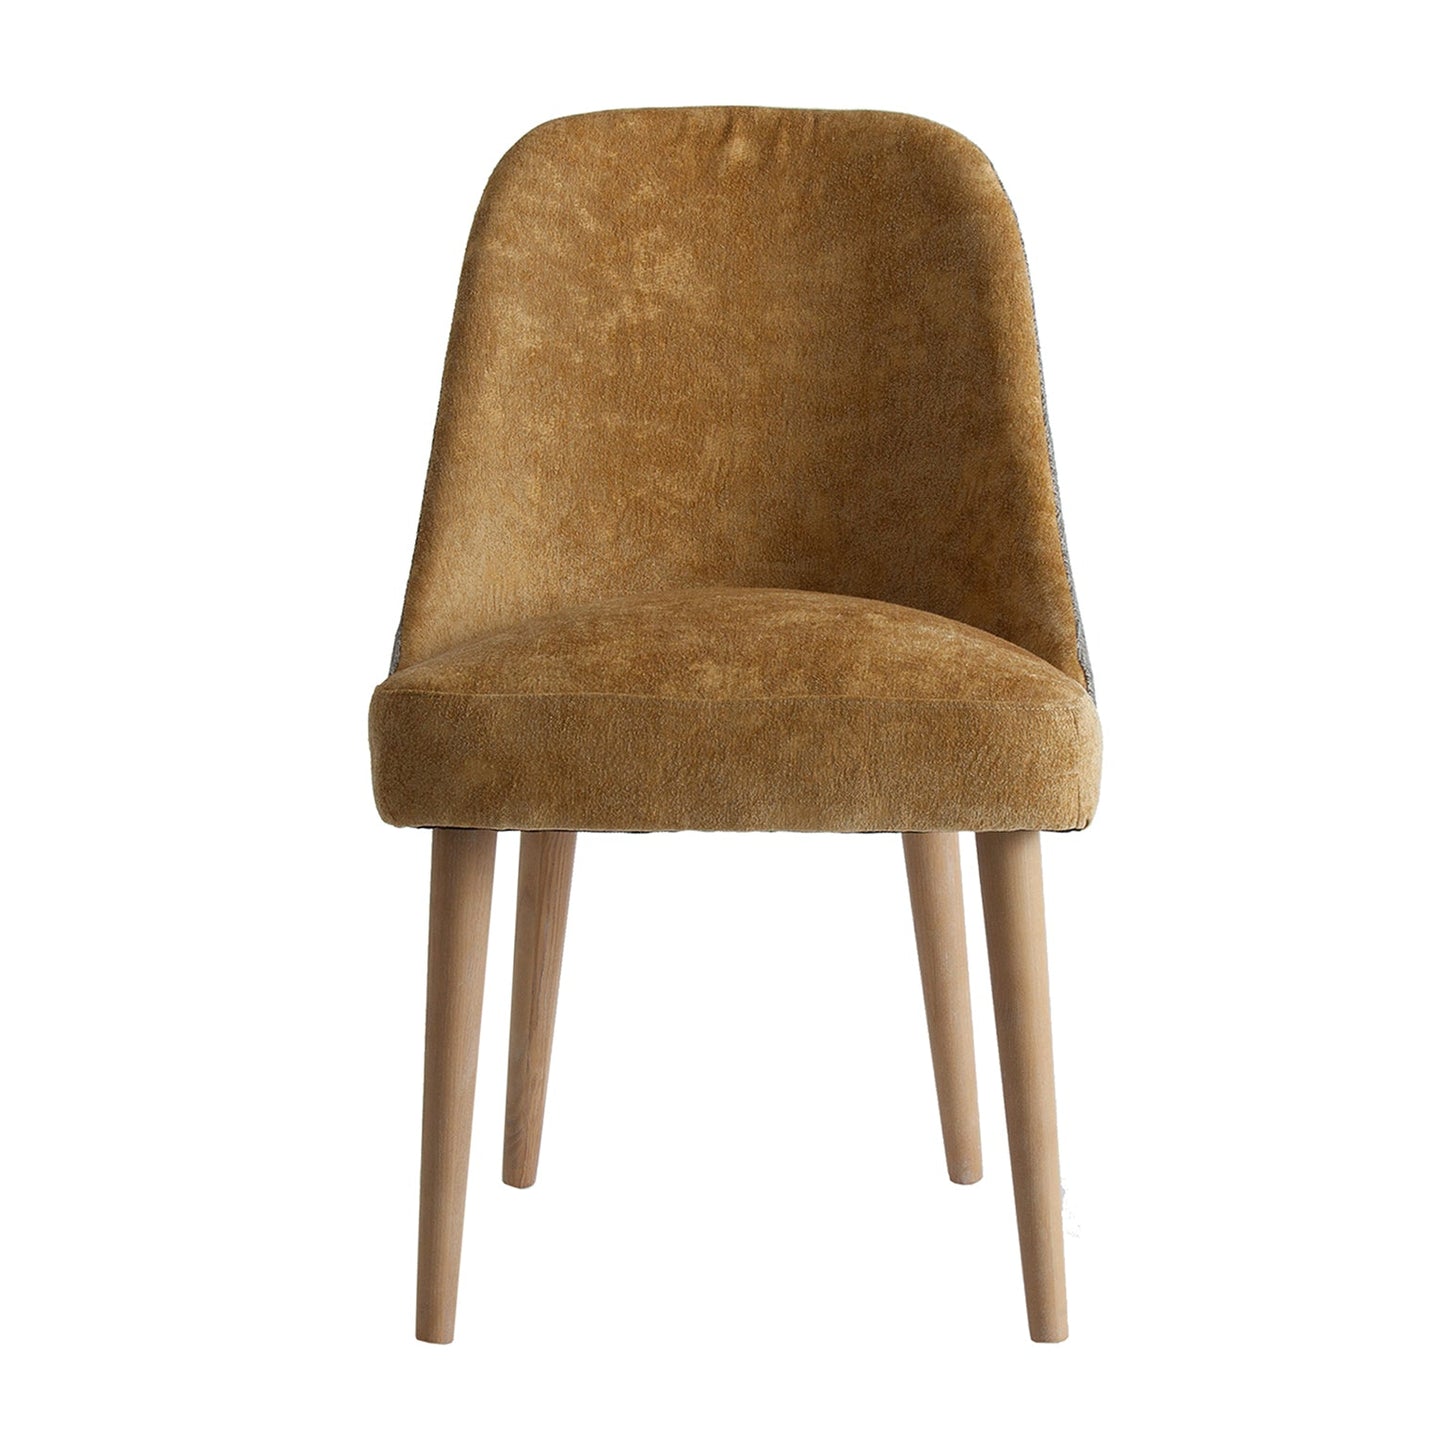 Lage Chair in Mustard Colour